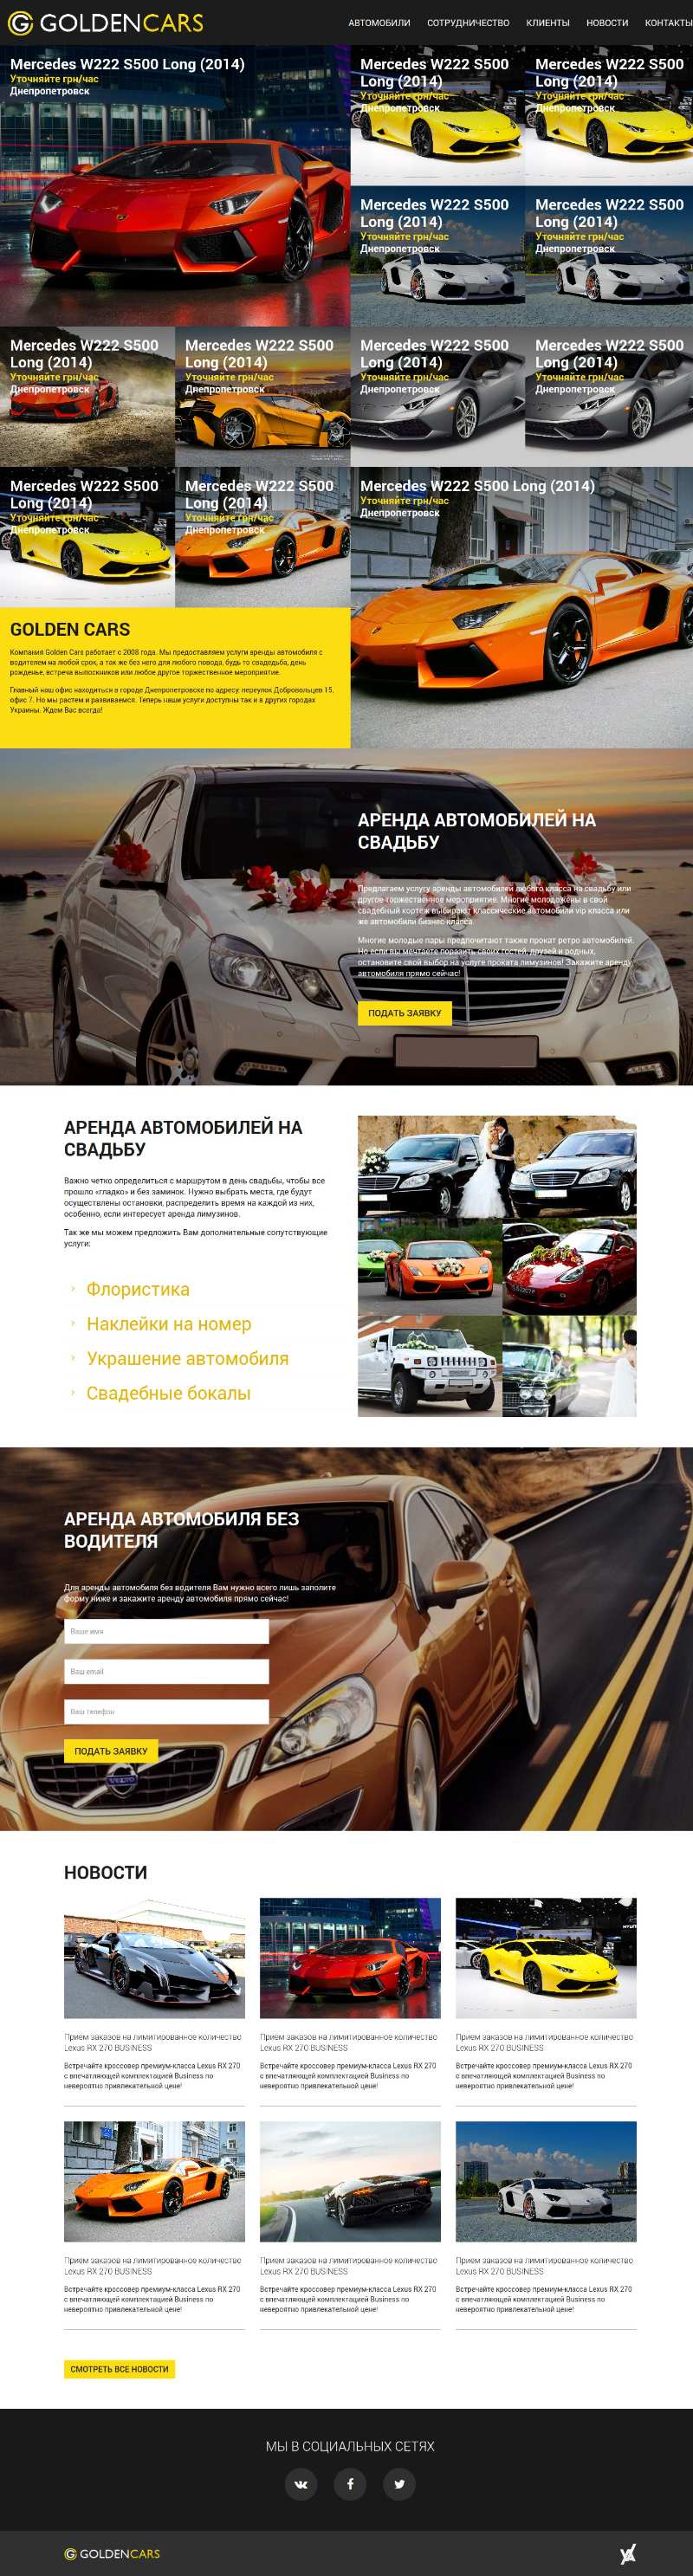 Golden Cars Auto Renting